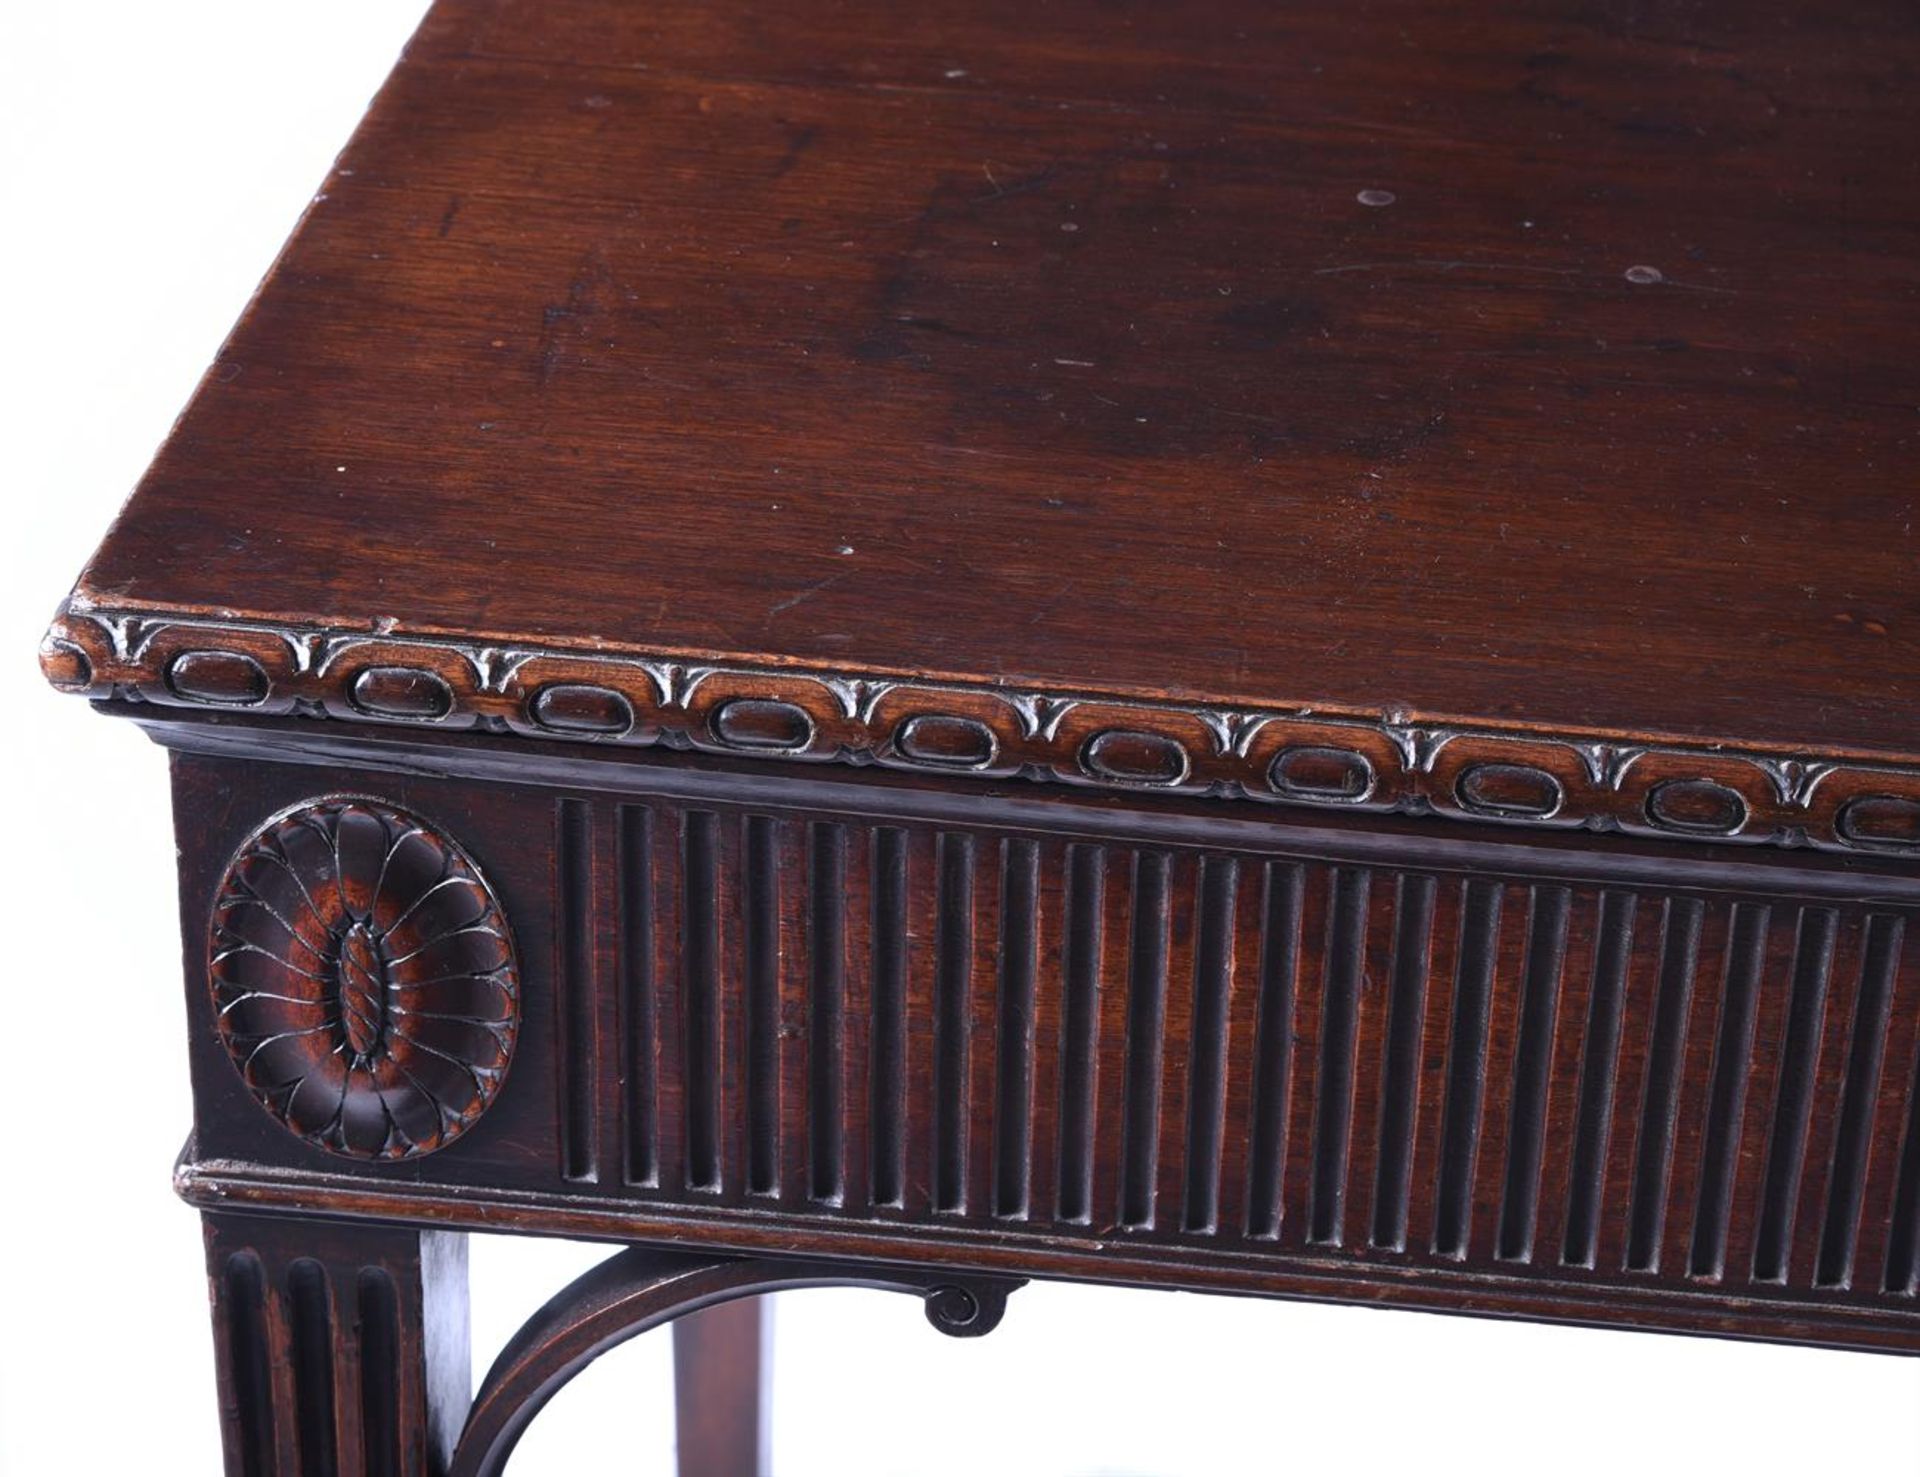 A MAHOGANY SERVING TABLE, IN THE MANNER OF INCE & MAYHEW, LATE 18TH OR EARLY 19TH CENTURY - Image 3 of 4